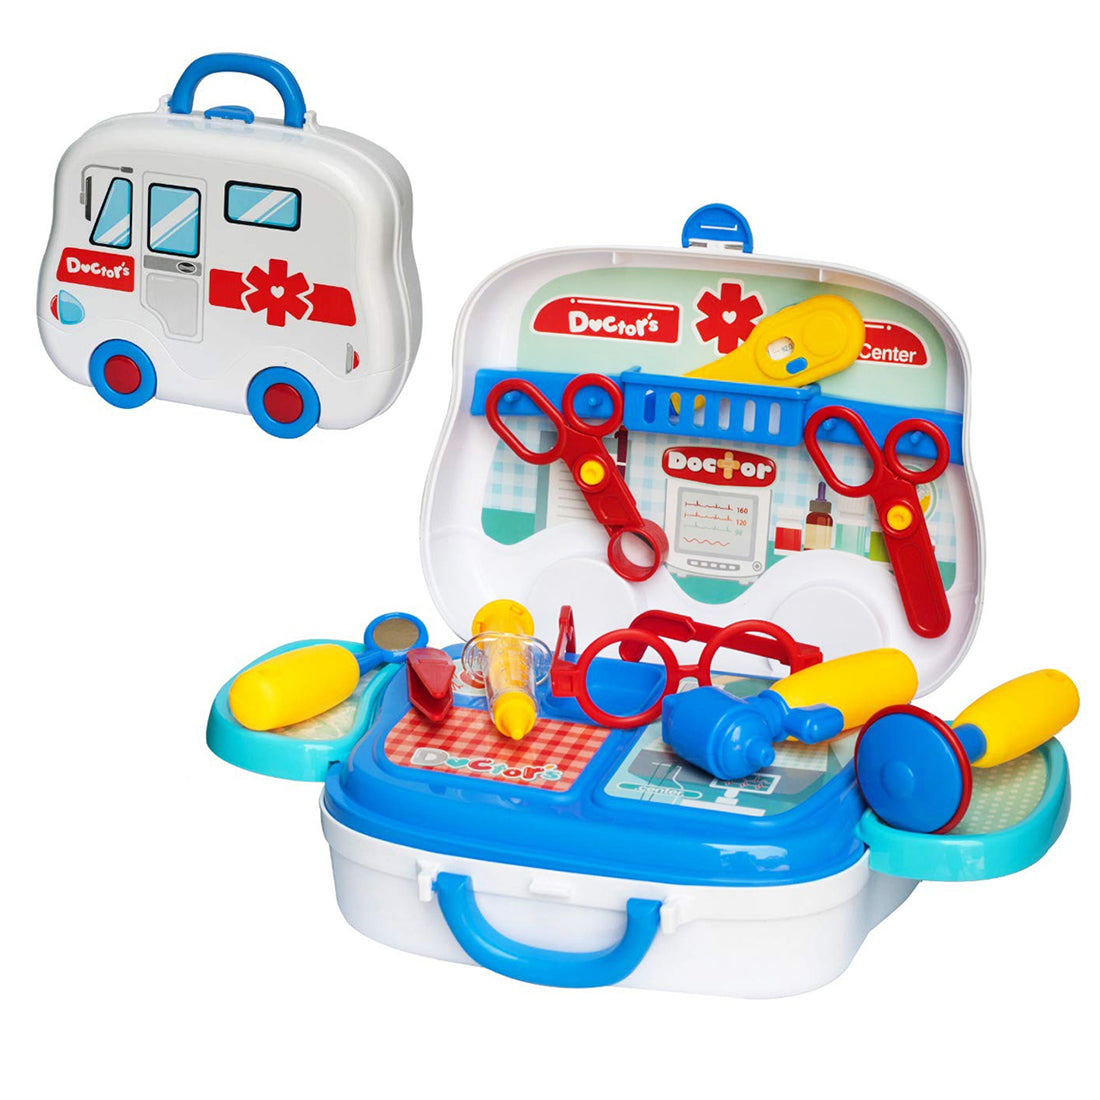 NHR Doctor Set Pretend Play Learning Educational Tool Toy with Portable Medical Clinic Suitcase & Equipment's -14 pcs- Multi color